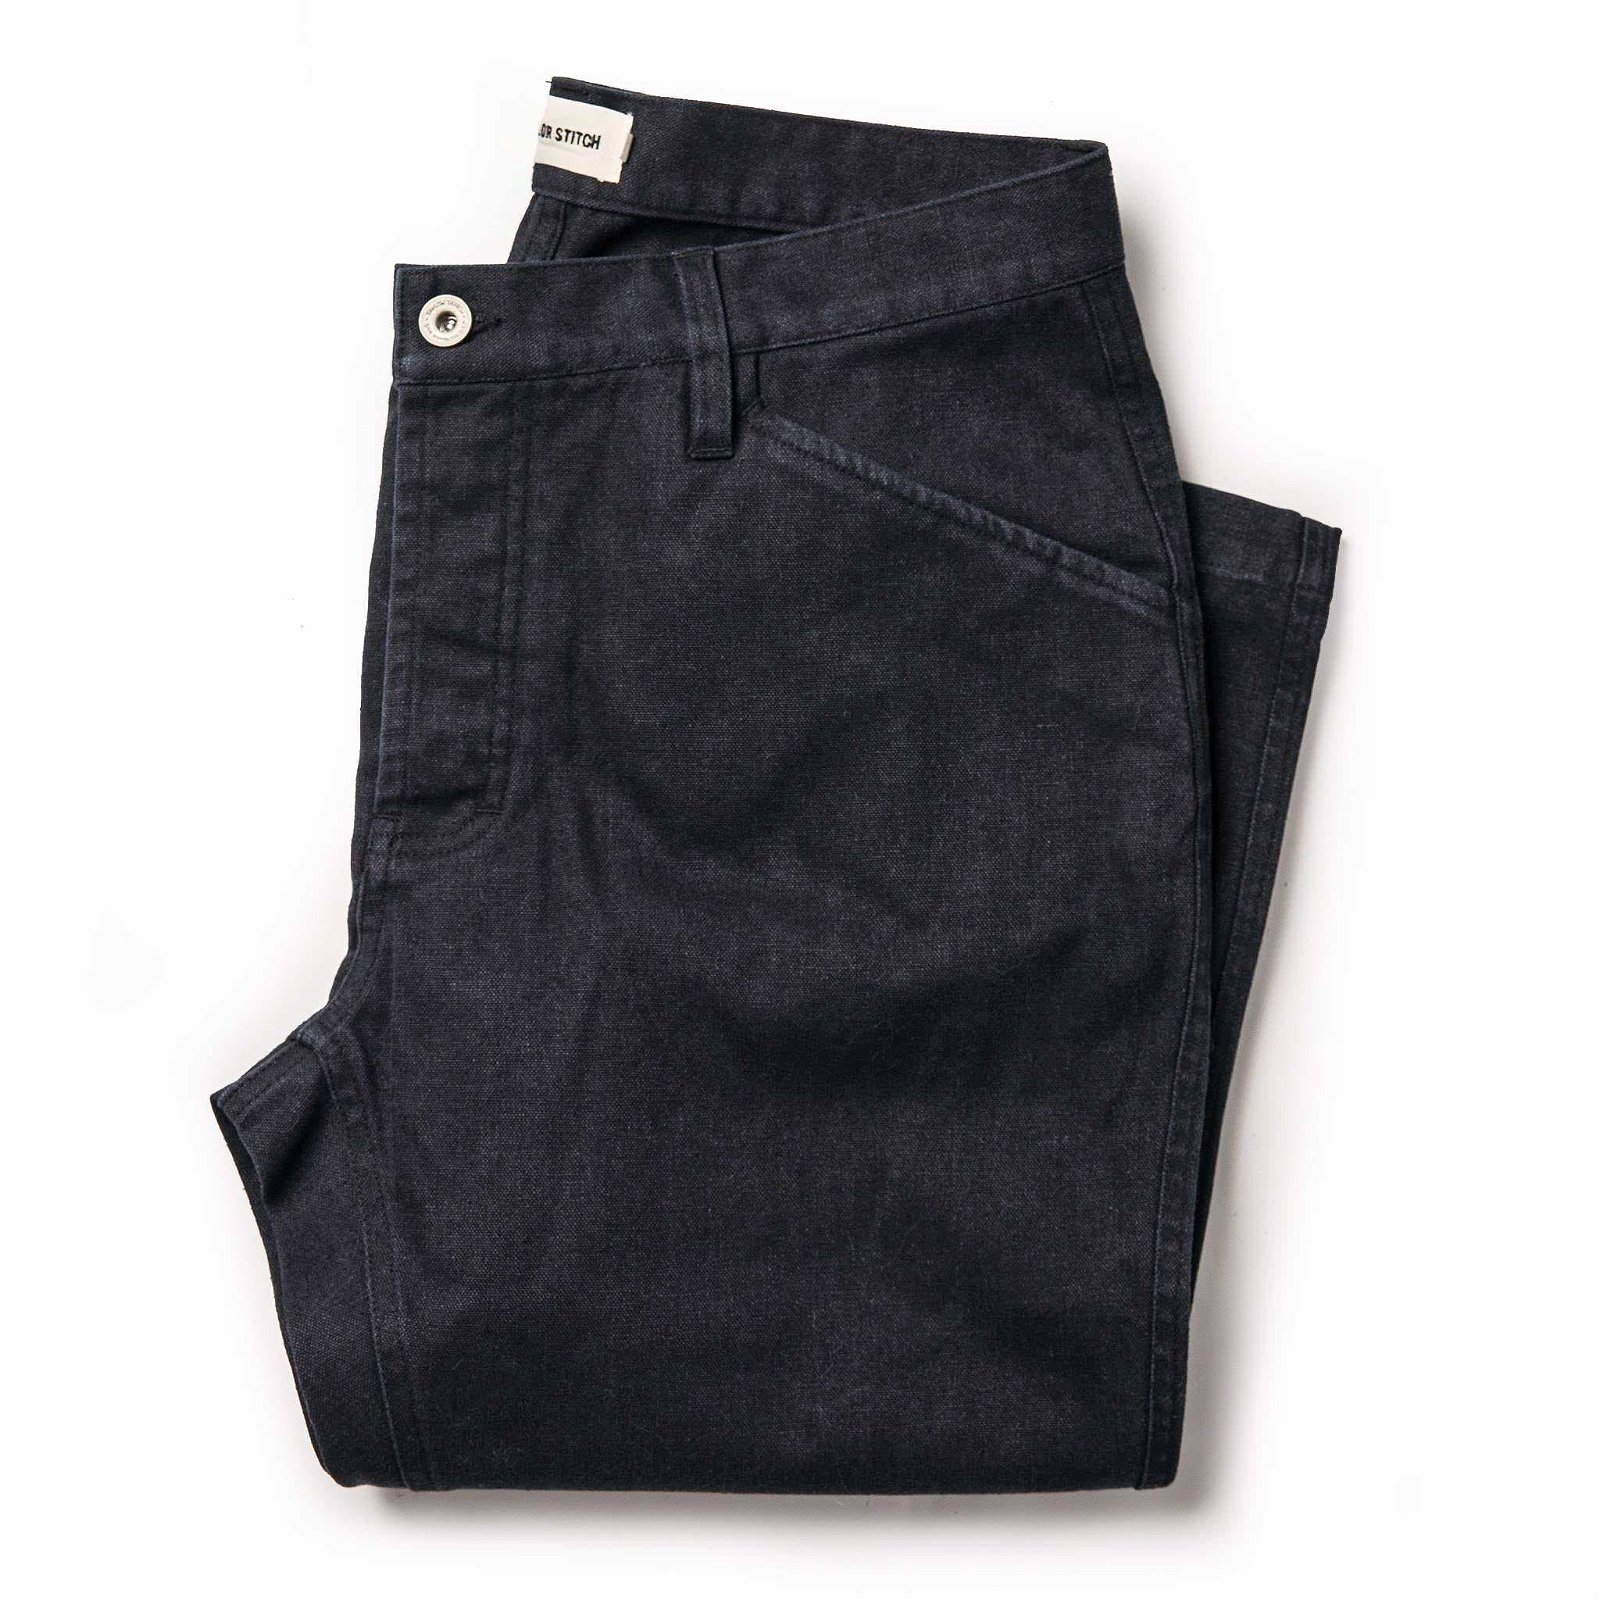 Image of The Camp Pant in Coal Boss Duck